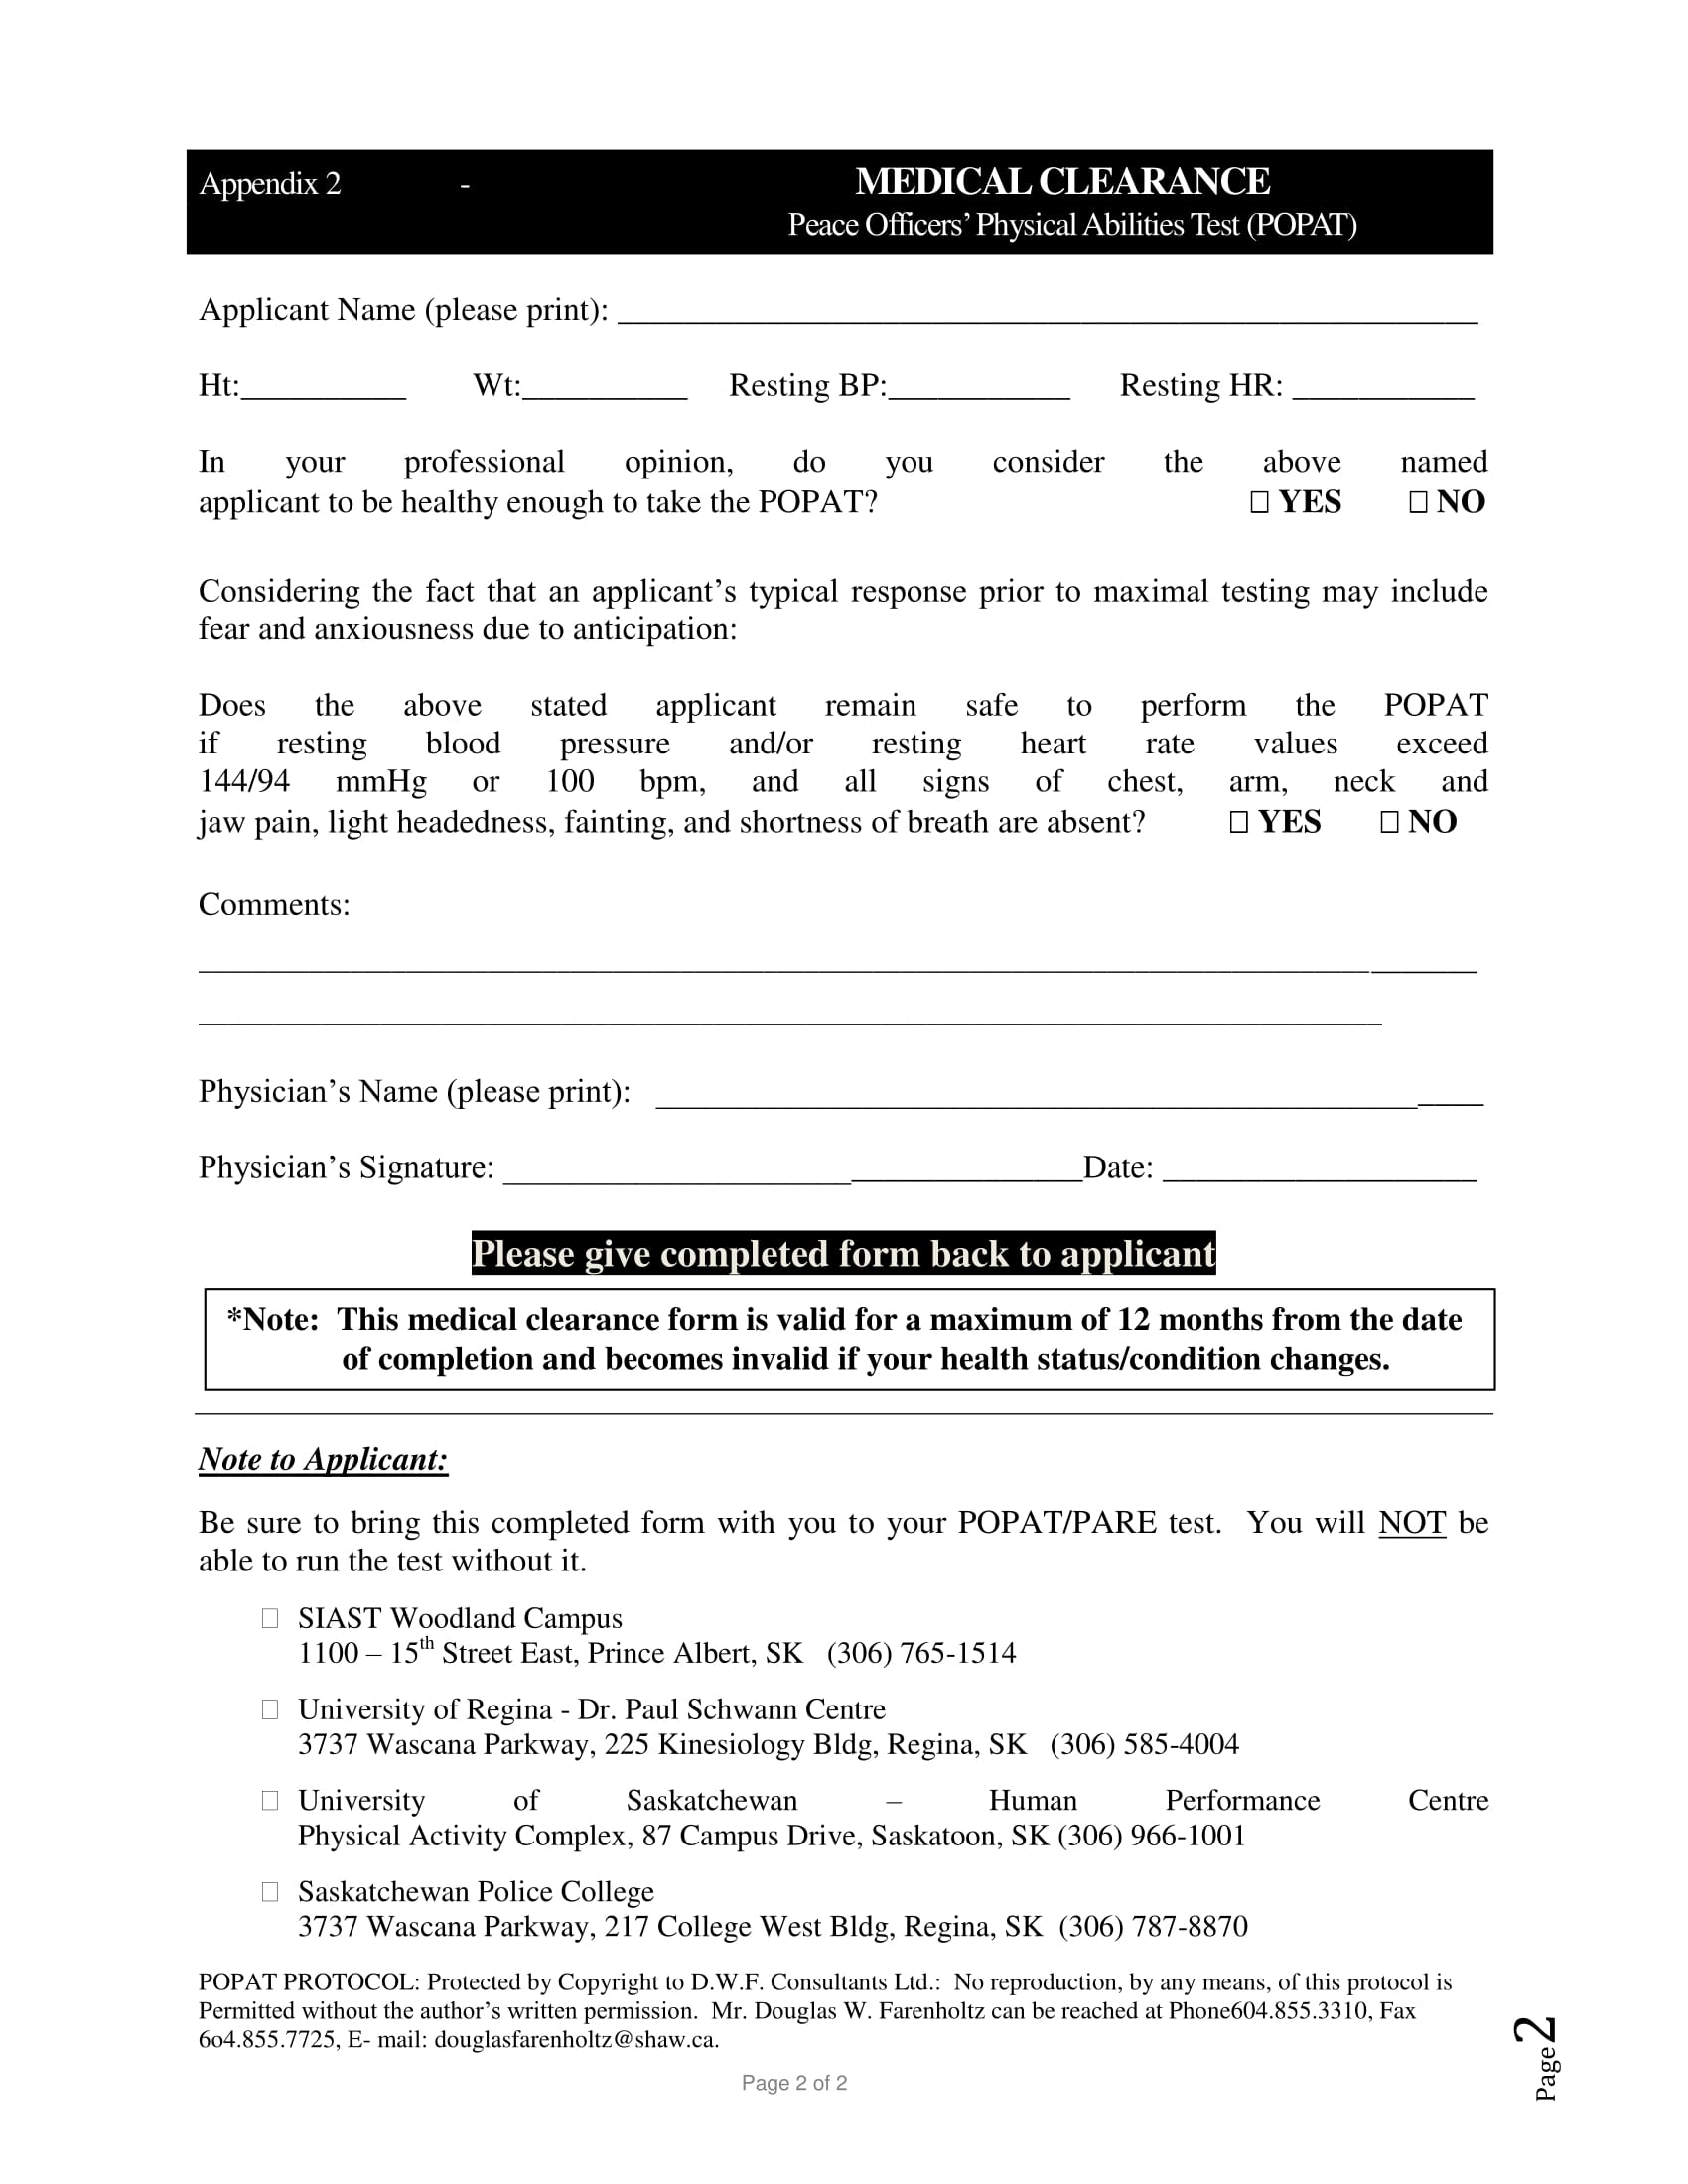 peace officer medical clearance form 2